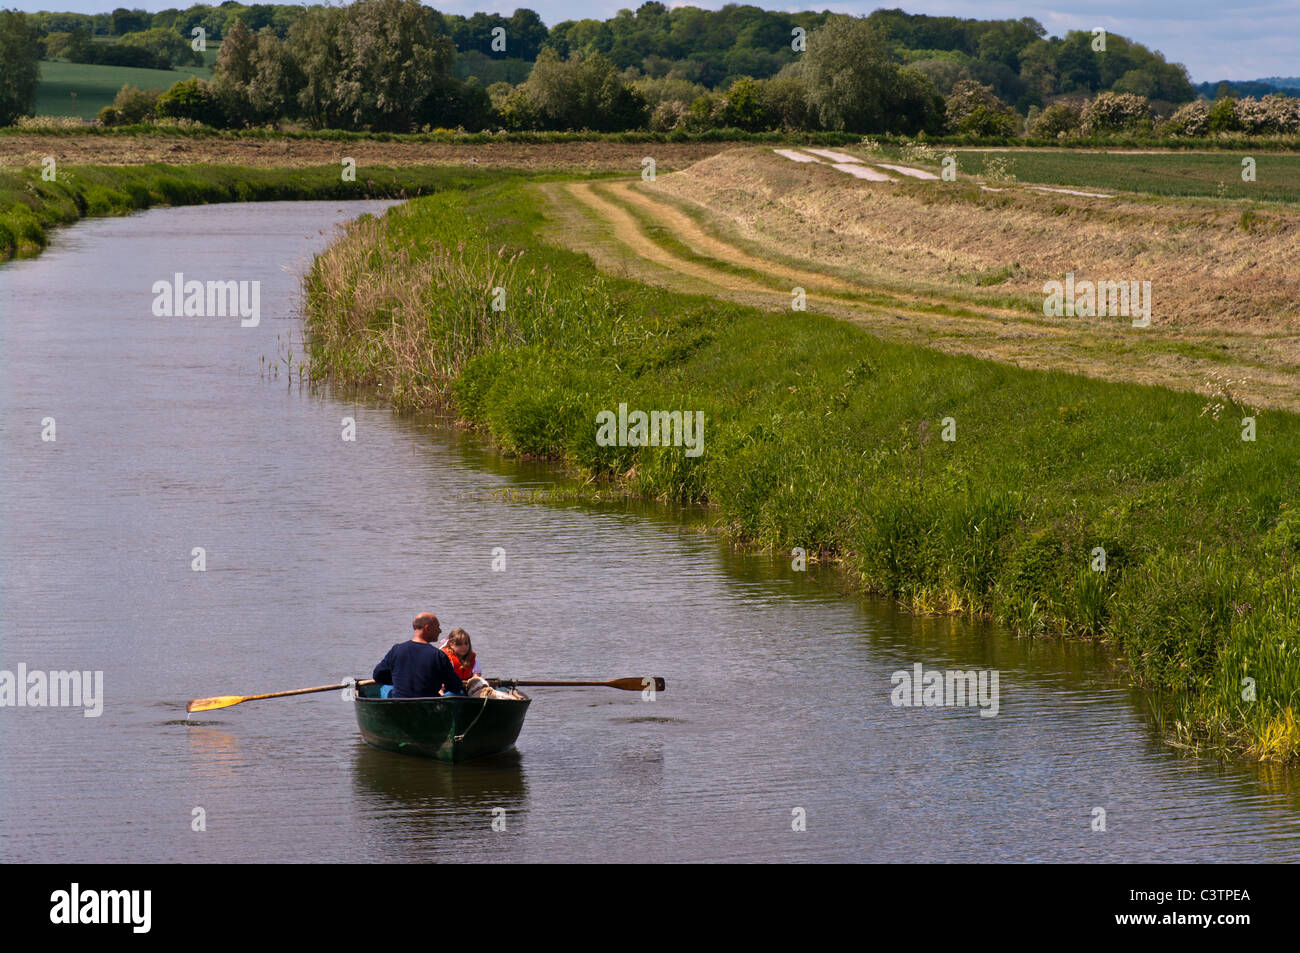 Barca a remi sul fiume Rother Newenden Kent England Foto Stock